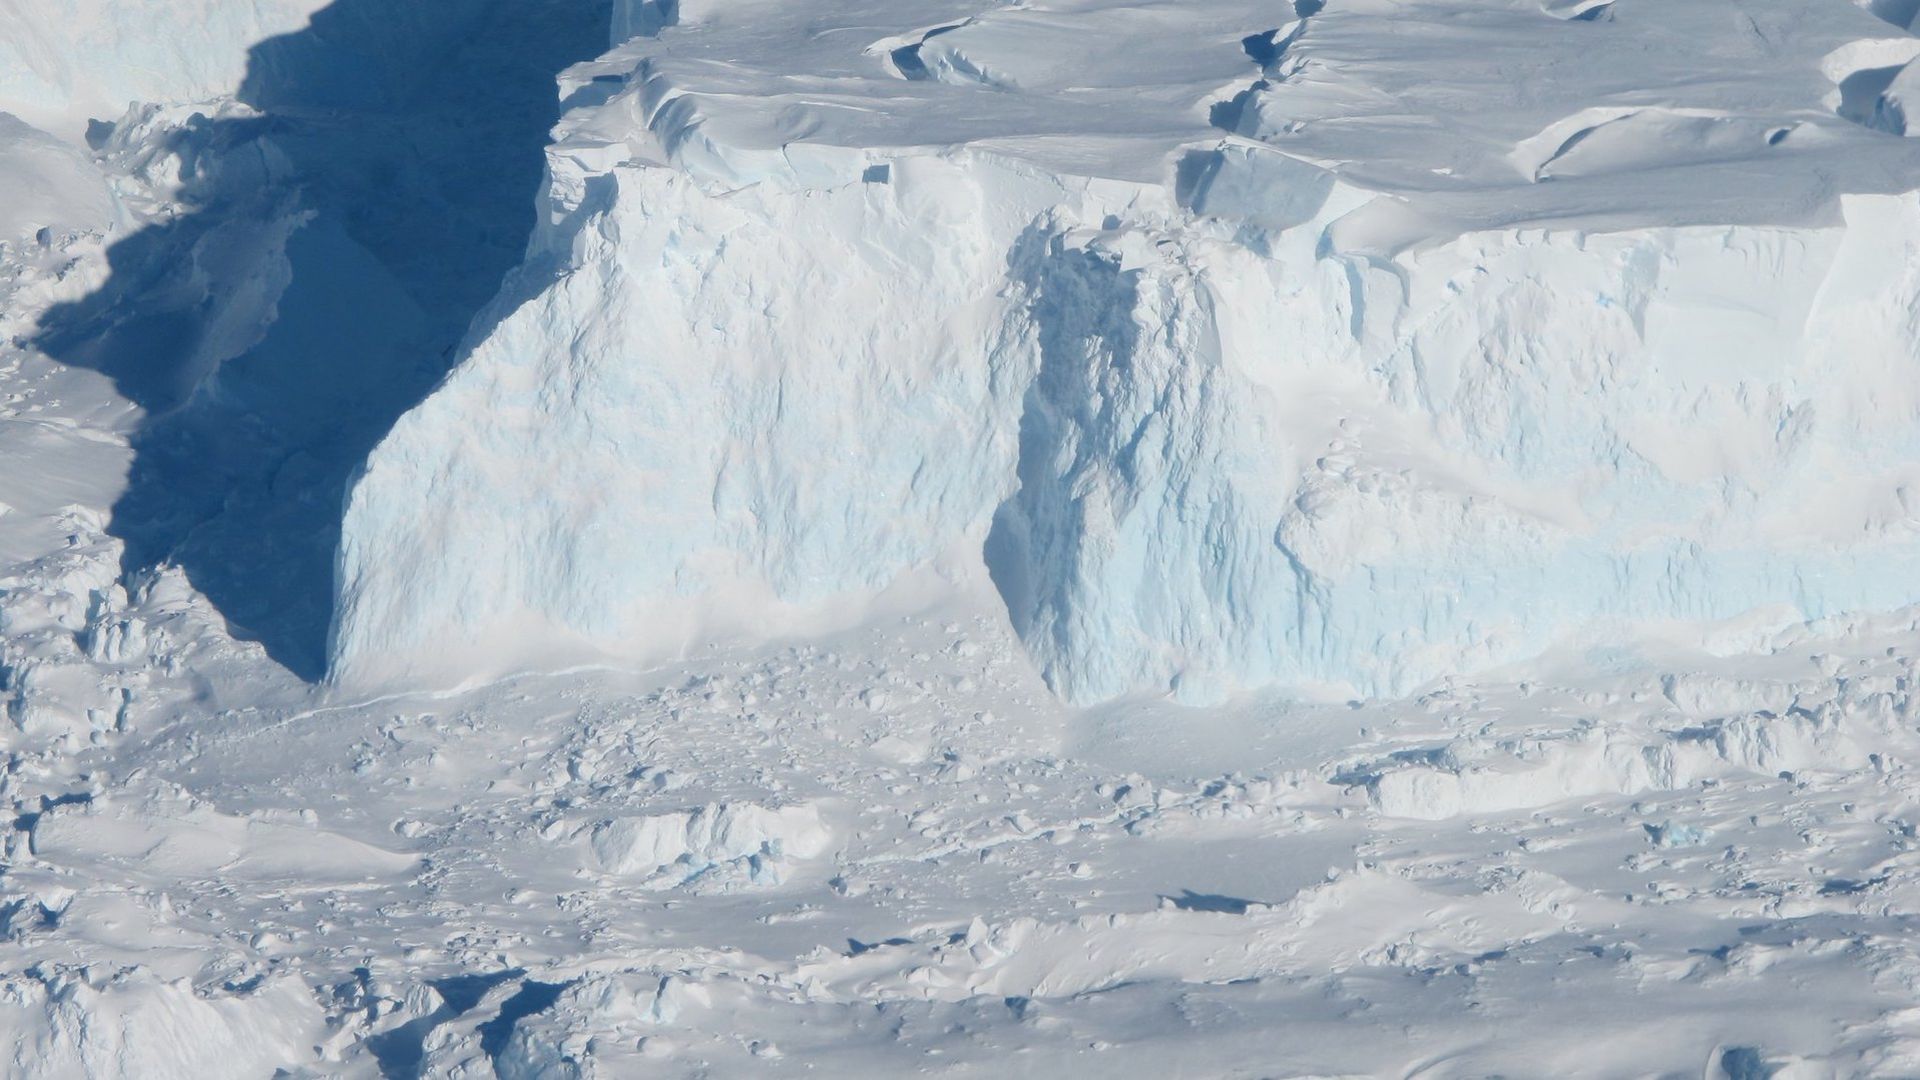 Aerial view of the cliffs at the edge of the Thwaites Ice Shelf in West Antarctica.